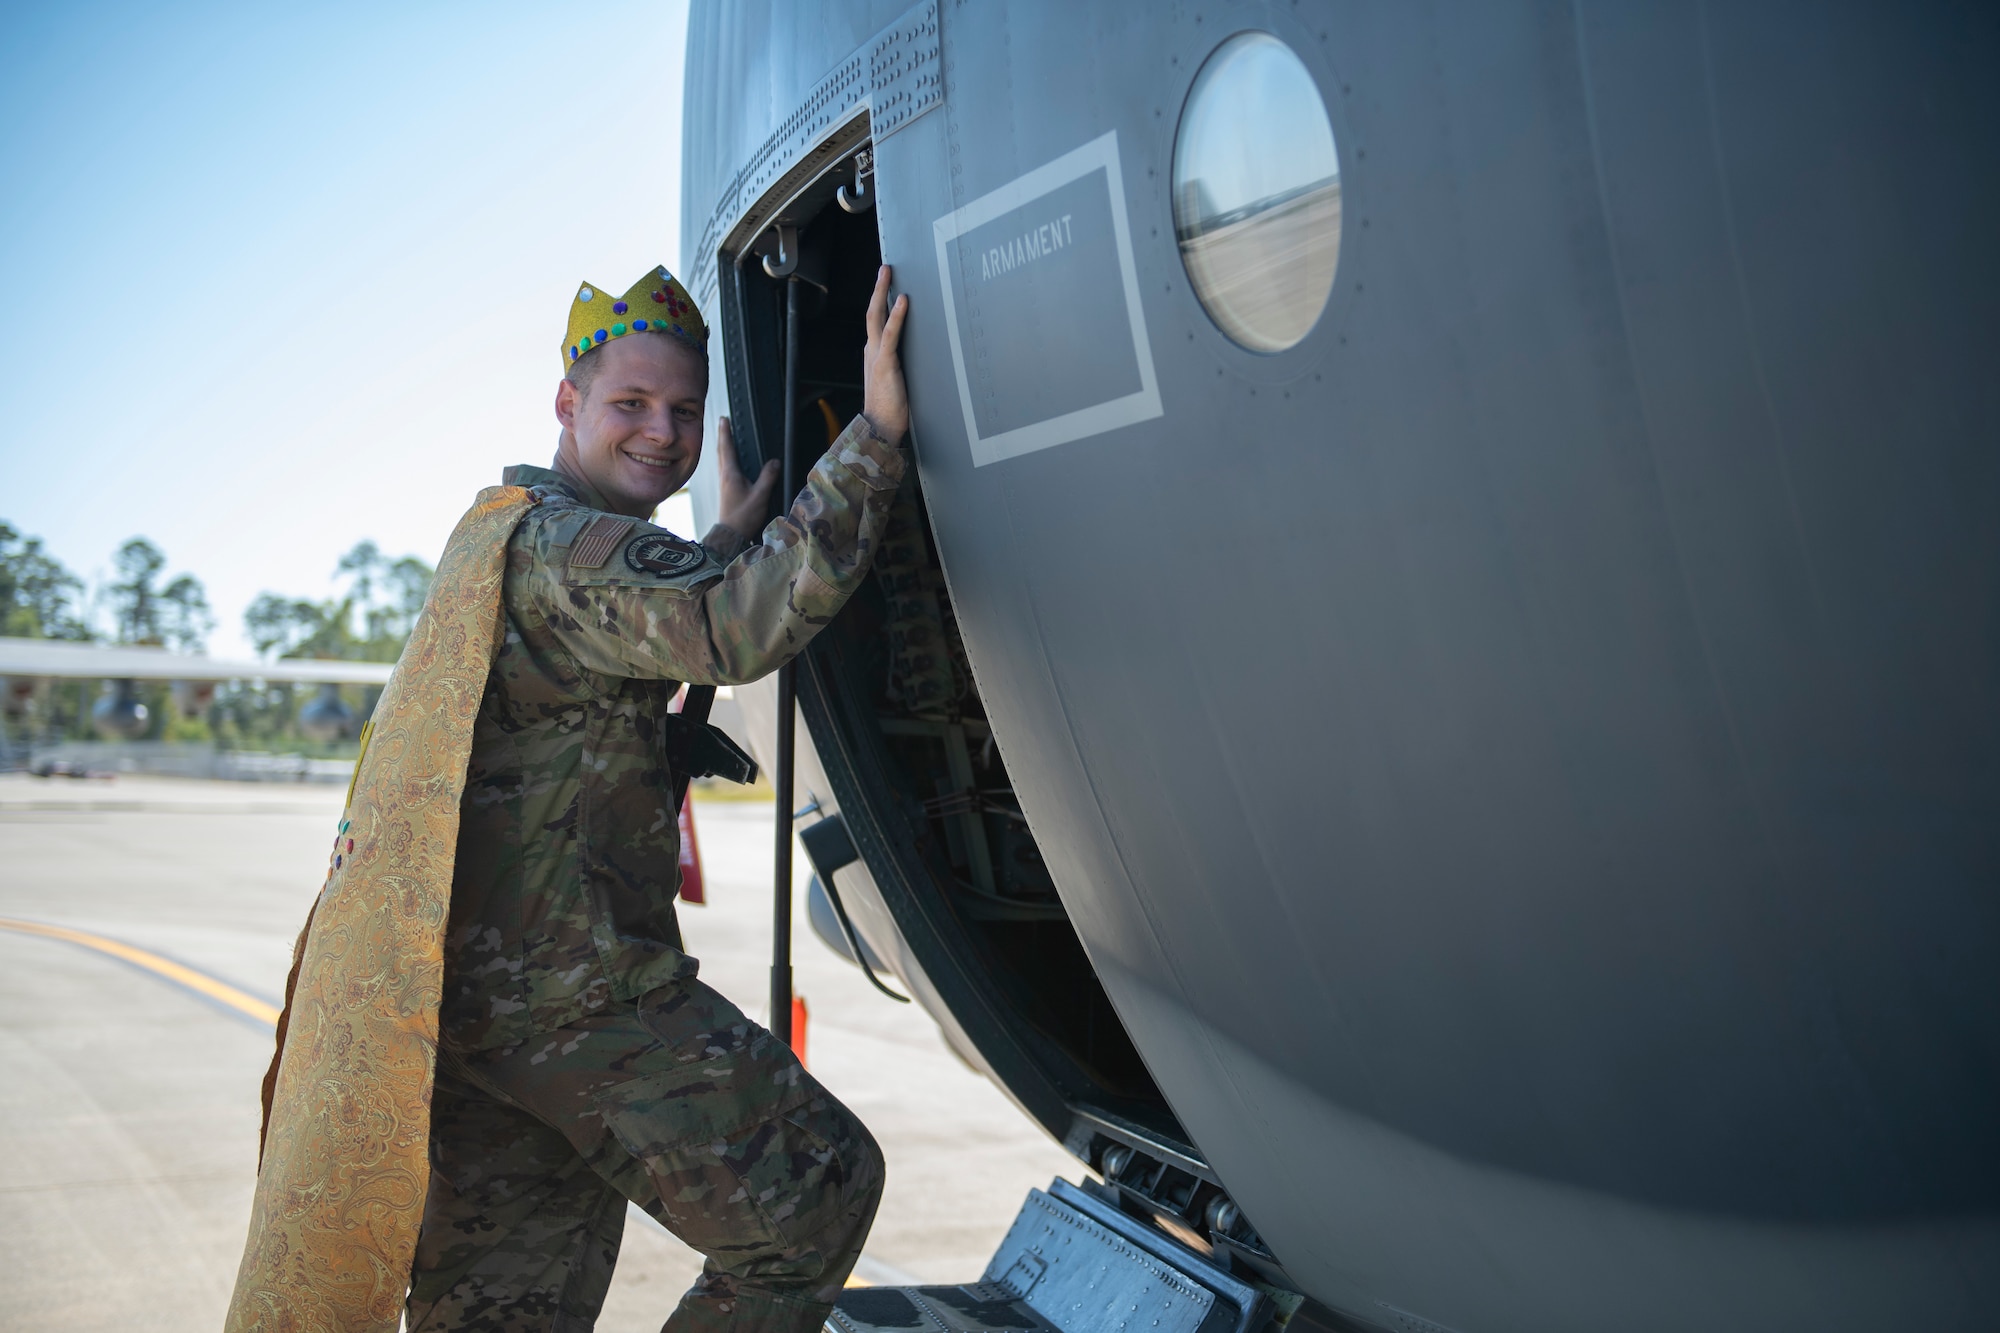 A photo of a man stepping inside an HC-130J, posing for a photo wearing a gold and bedazzled crown and cape.